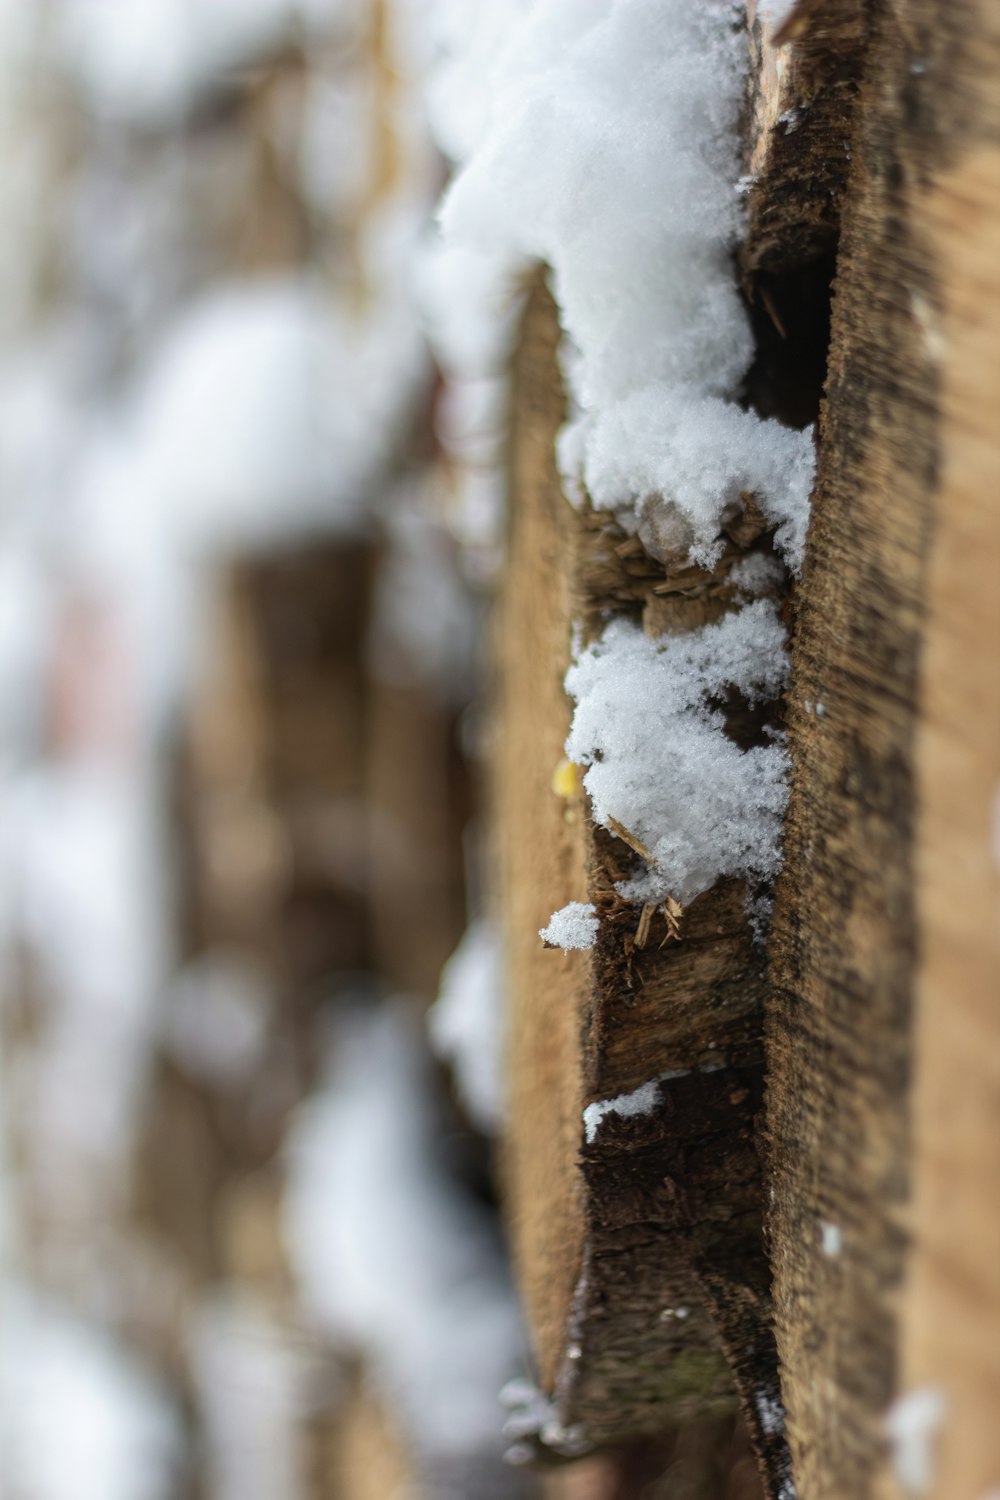 a close up of a piece of wood with snow on it